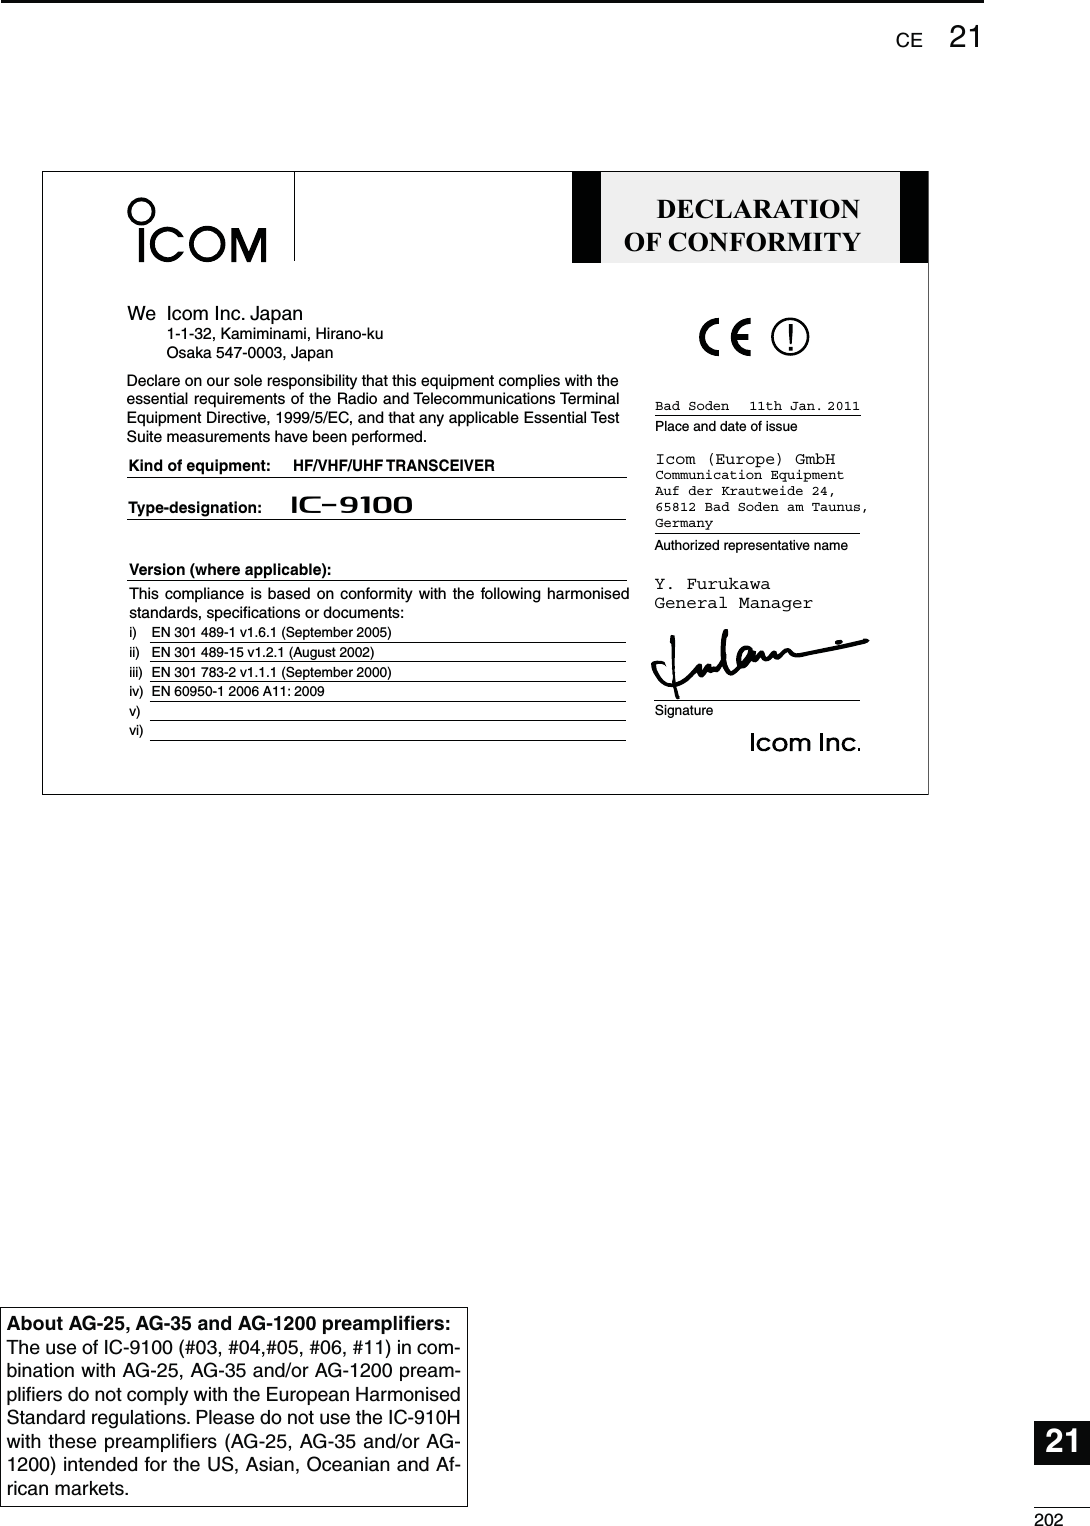 20221CE21DECLARATIONOF CONFORMITYWe Icom Inc. Japan1-1-32, Kamiminami, Hirano-kuOsaka 547-0003, JapanKind of equipment:Type-designation:SignatureAuthorized representative namePlace and date of issueVersion (where applicable): Y. FurukawaGeneral ManagerIcom (Europe) GmbHCommunication EquipmentAuf der Krautweide 24,65812 Bad Soden am Taunus,GermanyHF/VHF/UHF TRANSCEIVERiC- 910011th Jan. 2011Bad SodenDeclare on our sole responsibility that this equipment complies with the essential requirements of the Radio and Telecommunications Terminal Equipment Directive, 1999/5/EC, and that any applicable Essential Test Suite measurements have been performed.This compliance is based on conformity with the following harmonised standards, specifications or documents:EN 301 489-1 v1.6.1 (September 2005)EN 301 489-15 v1.2.1 (August 2002) EN 301 783-2 v1.1.1 (September 2000)  EN 60950-1 2006 A11: 2009  i)ii)iii) iv)v) vi) !BOUT!&apos;!&apos;AND!&apos;PREAMPLIlERSThe use of IC-9100 (#03, #04,#05, #06, #11) in com-bination with AG-25, AG-35 and/or AG-1200 pream-pliﬁers do not comply with the European Harmonised Standard regulations. Please do not use the IC-910H with these preampliﬁers (AG-25, AG-35 and/or AG-1200) intended for the US, Asian, Oceanian and Af-rican markets.